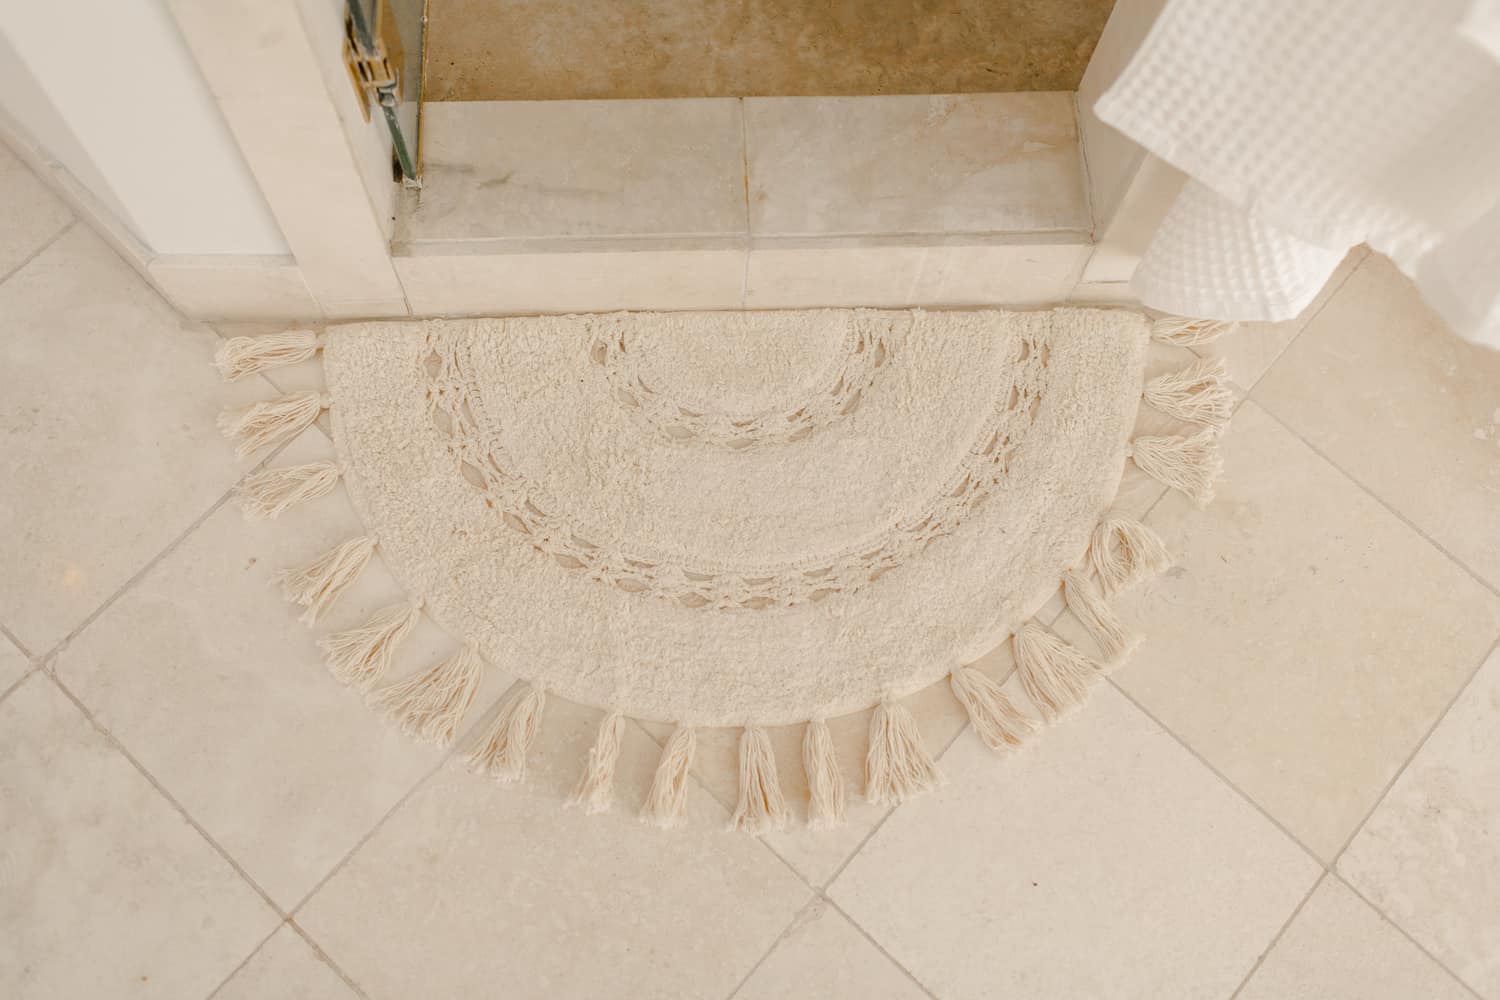 a white rug in front of the shower